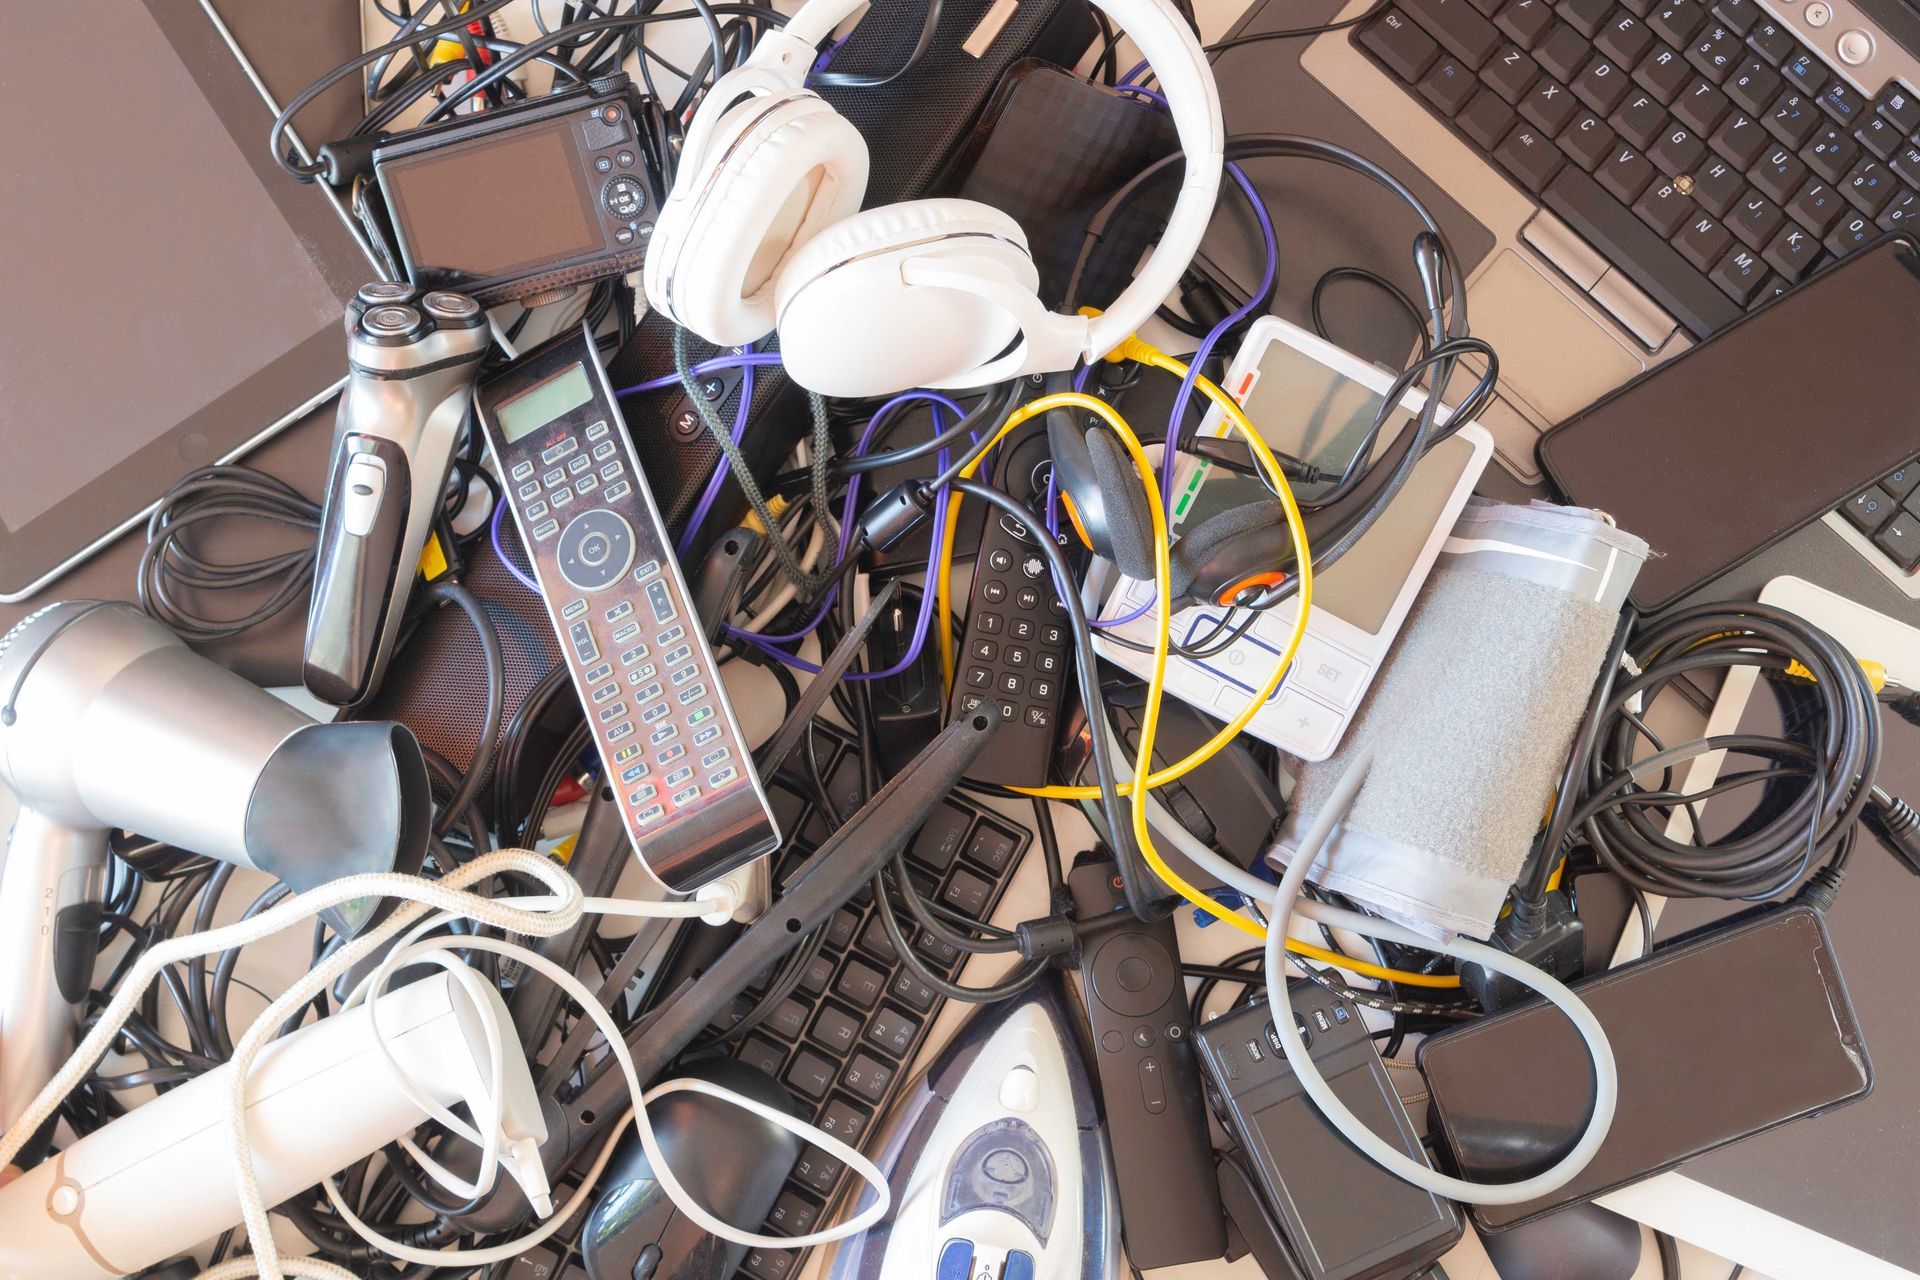 a pile of electronics including a hair dryer and headphones